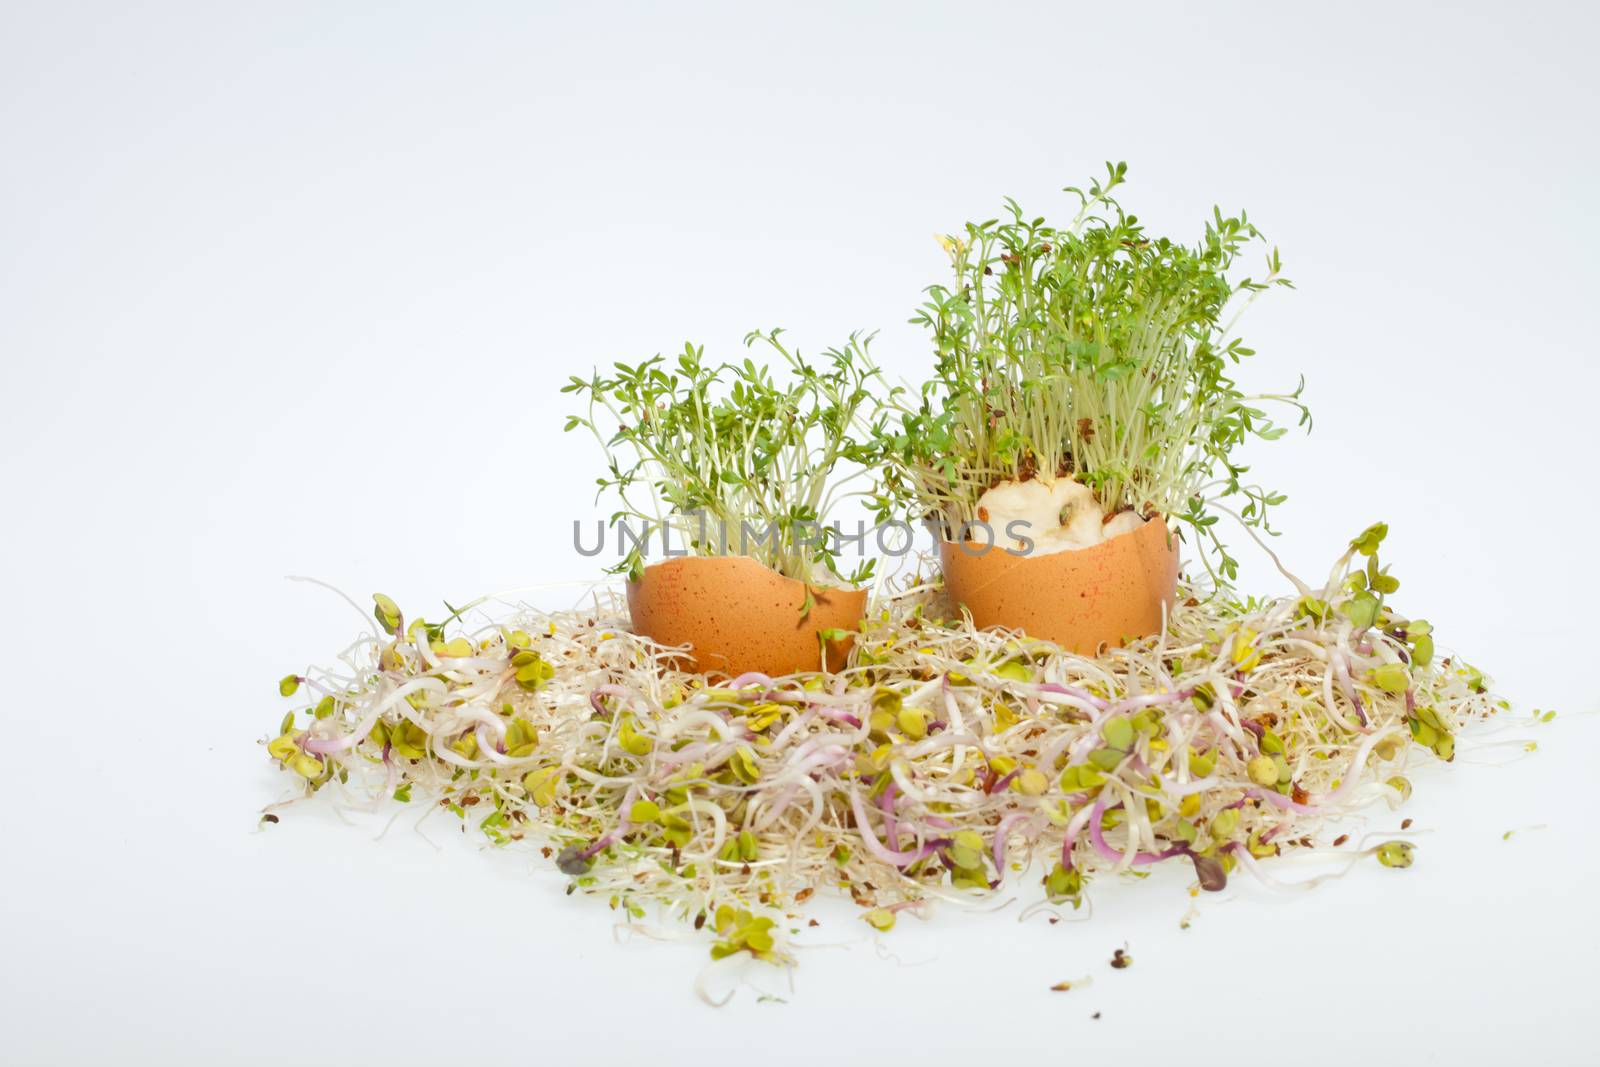 Fresh Alfalfa Sprouts and Spring Easter Egg by wjarek